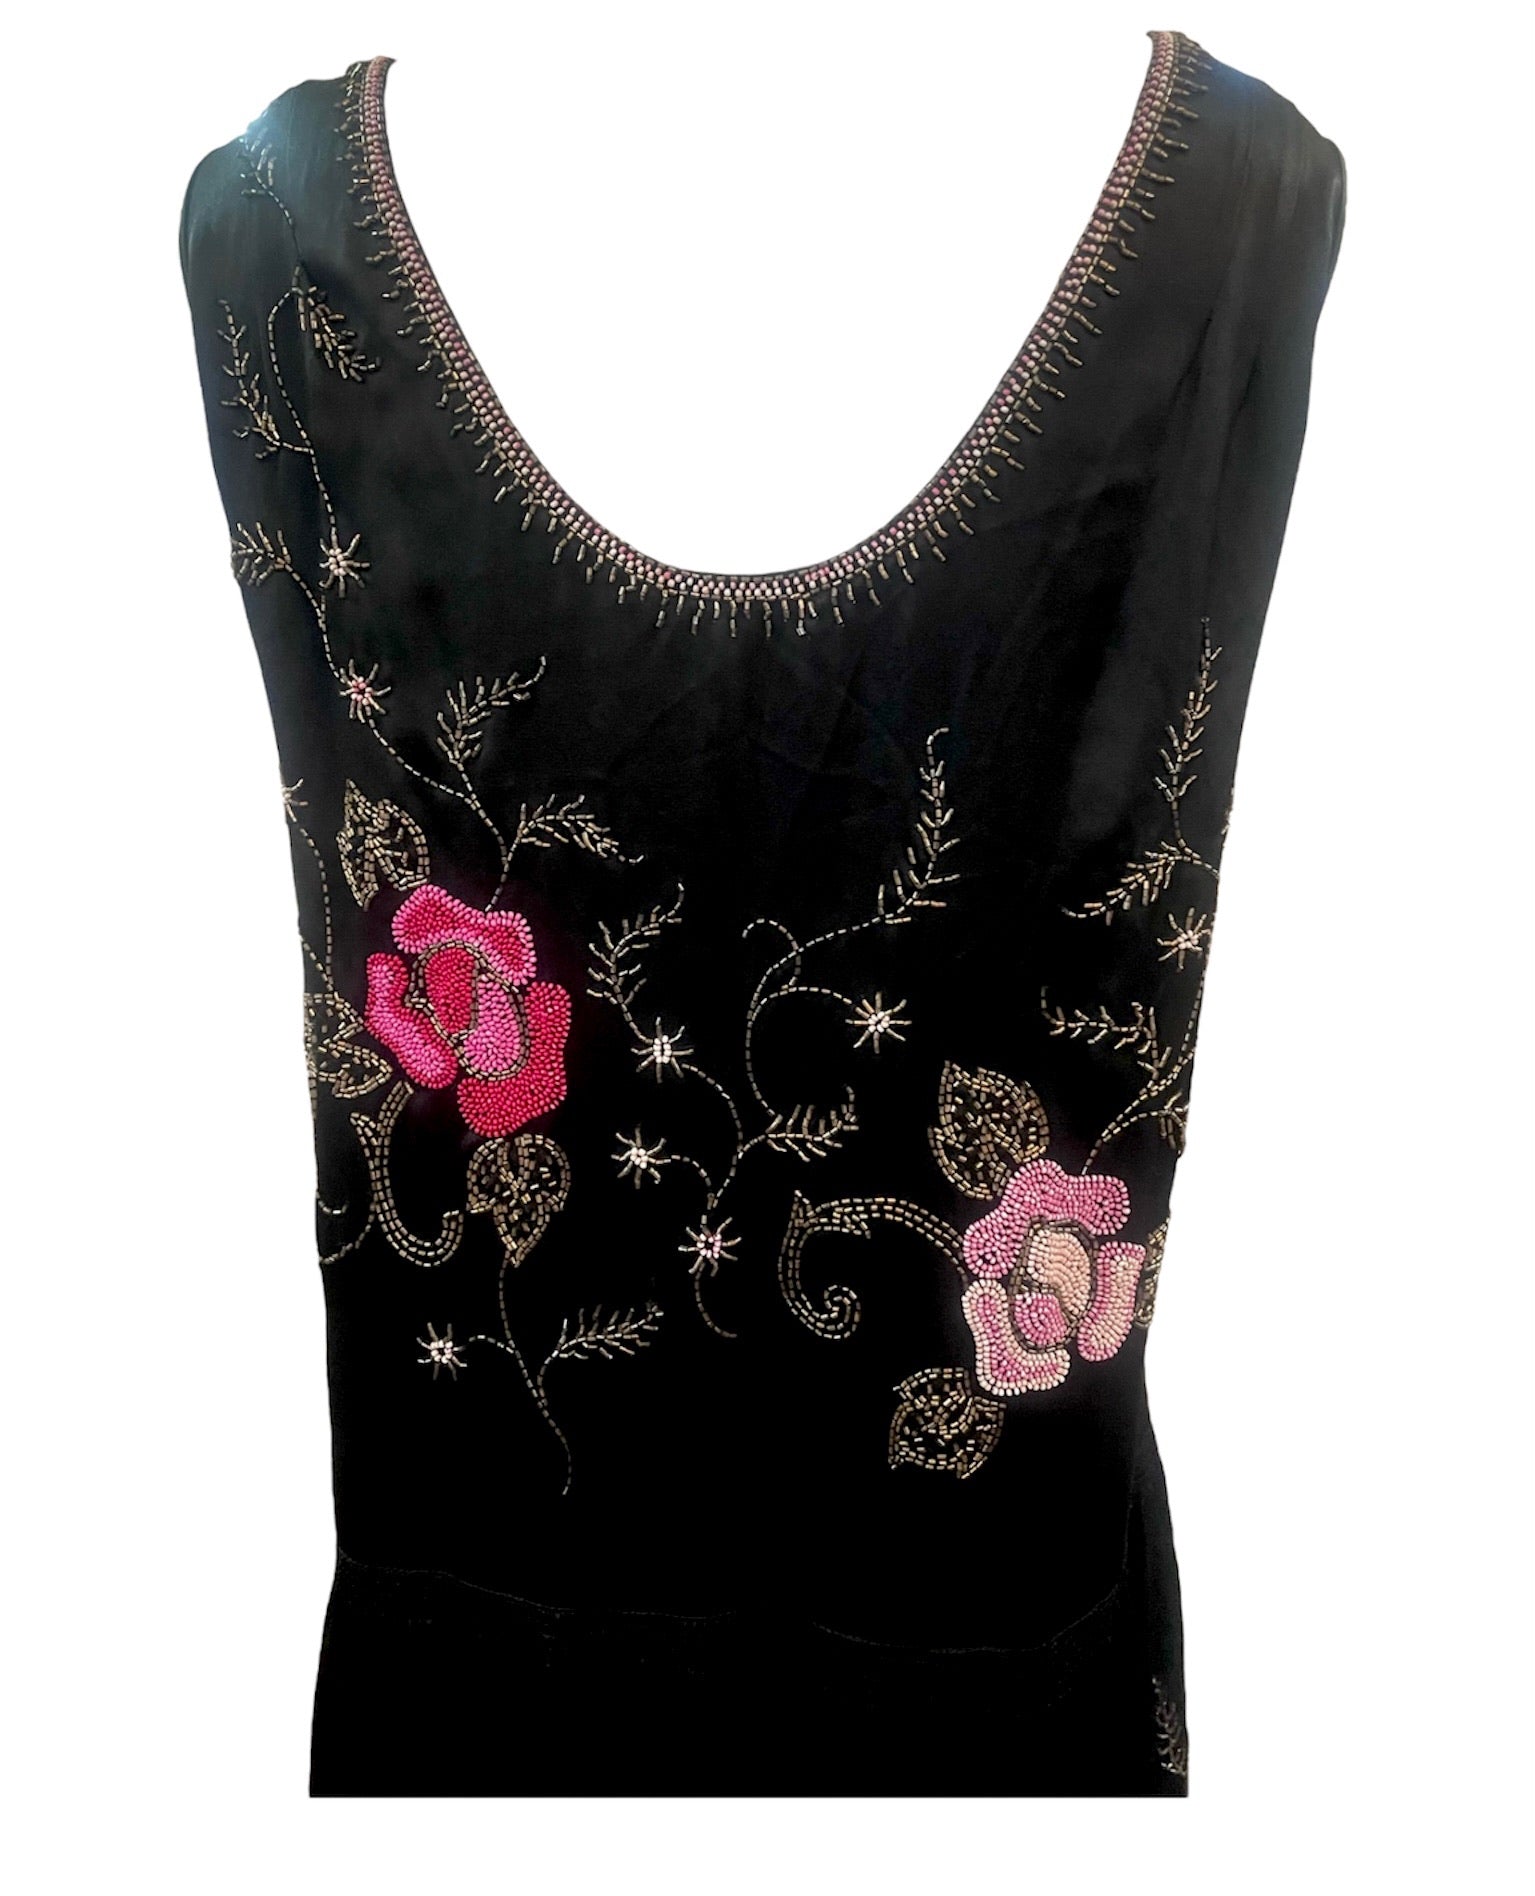 20s Satin Floral Beaded Dress with Scallop Hem